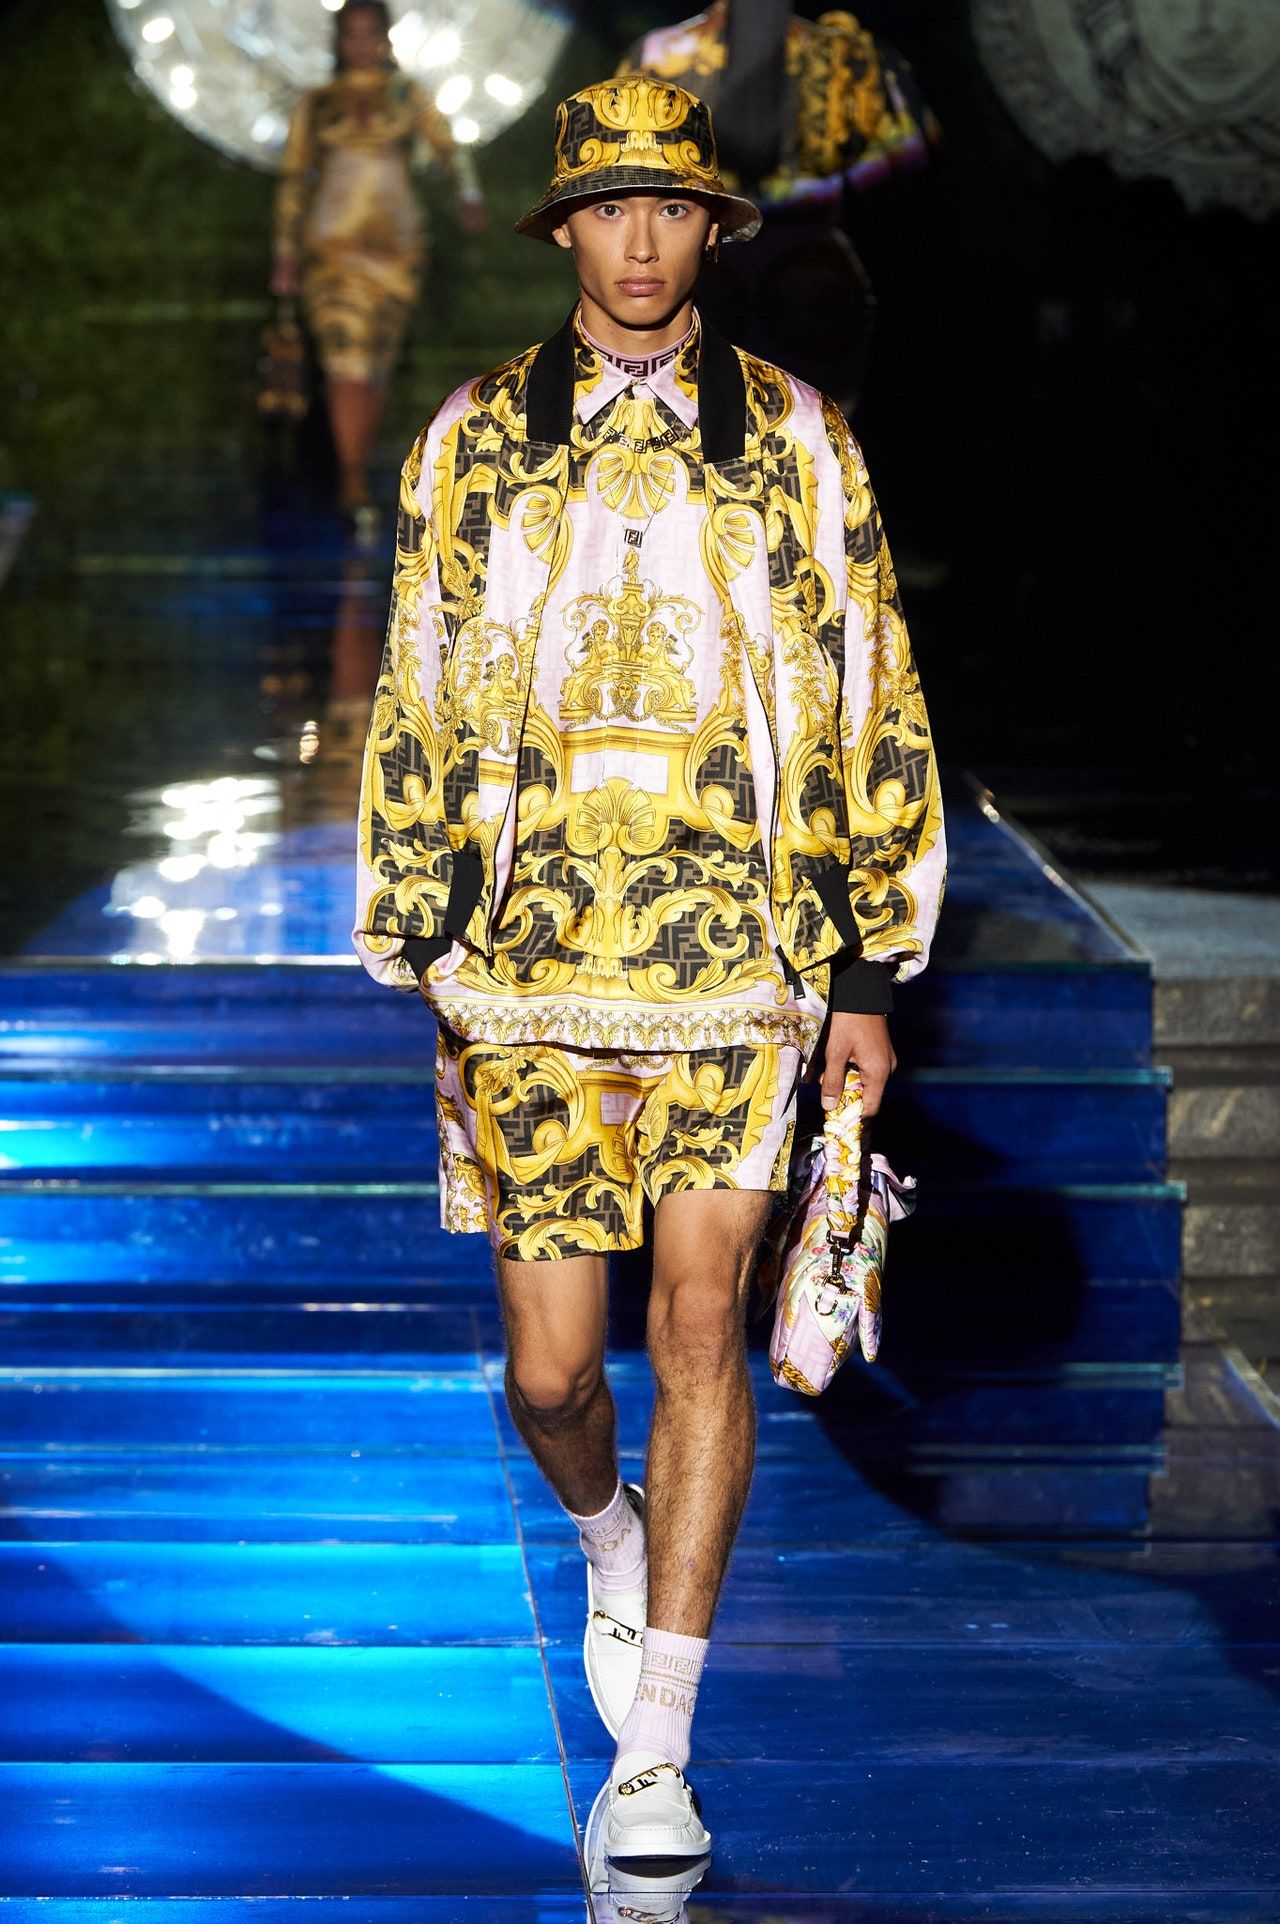 Versace and Fendi collaborate on Fendace catwalk show in Milan